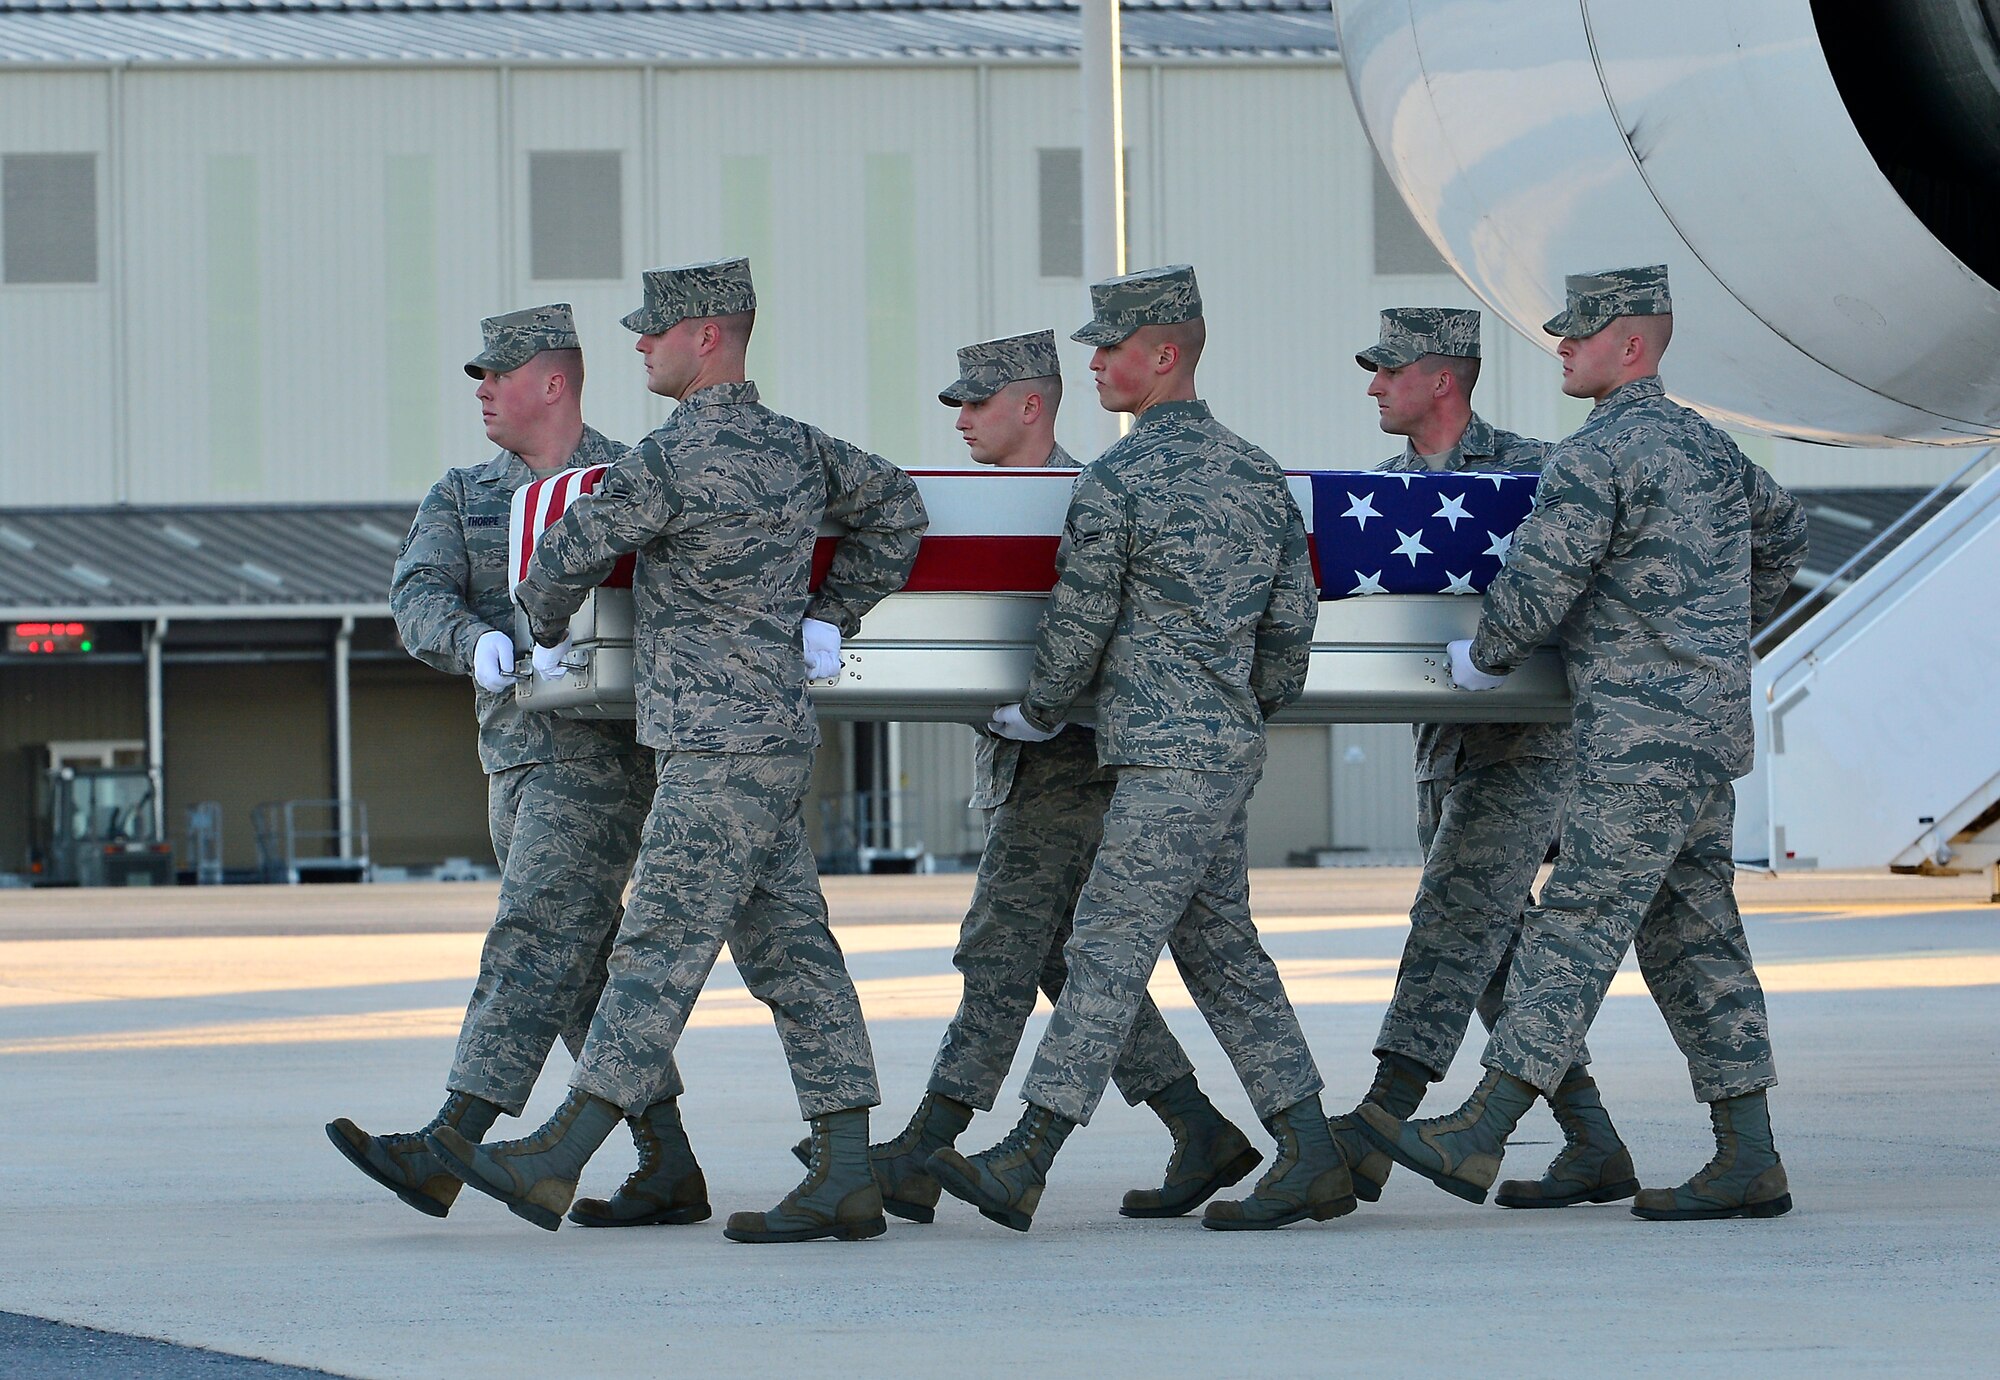 A U.S. Air Force carry team transfers the remains of Tech. Sgt. Larry D. Bunn, 43, of Bossier City, La., at Dover Air Force Base, Del., on March 9, 2013. Bunn was assigned to the 307th Maintenance Squadron at Barksdale Air Force Base, La. (U.S. Air Force photo/David S. Tucker)